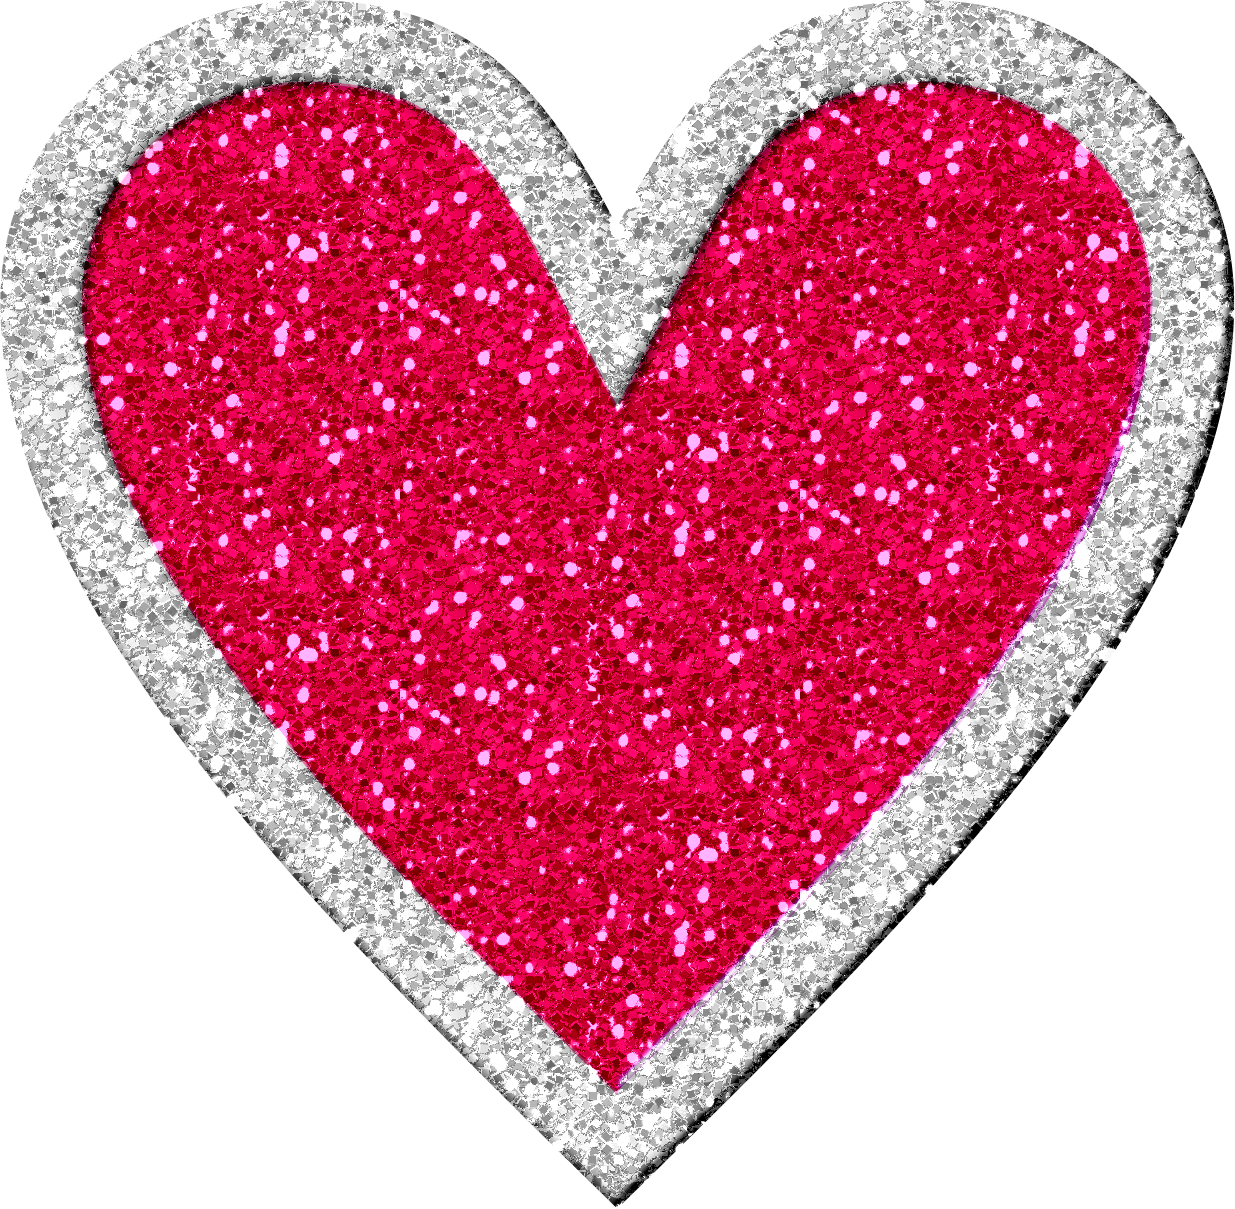 Hearts clipart glitter, Hearts glitter Transparent FREE for